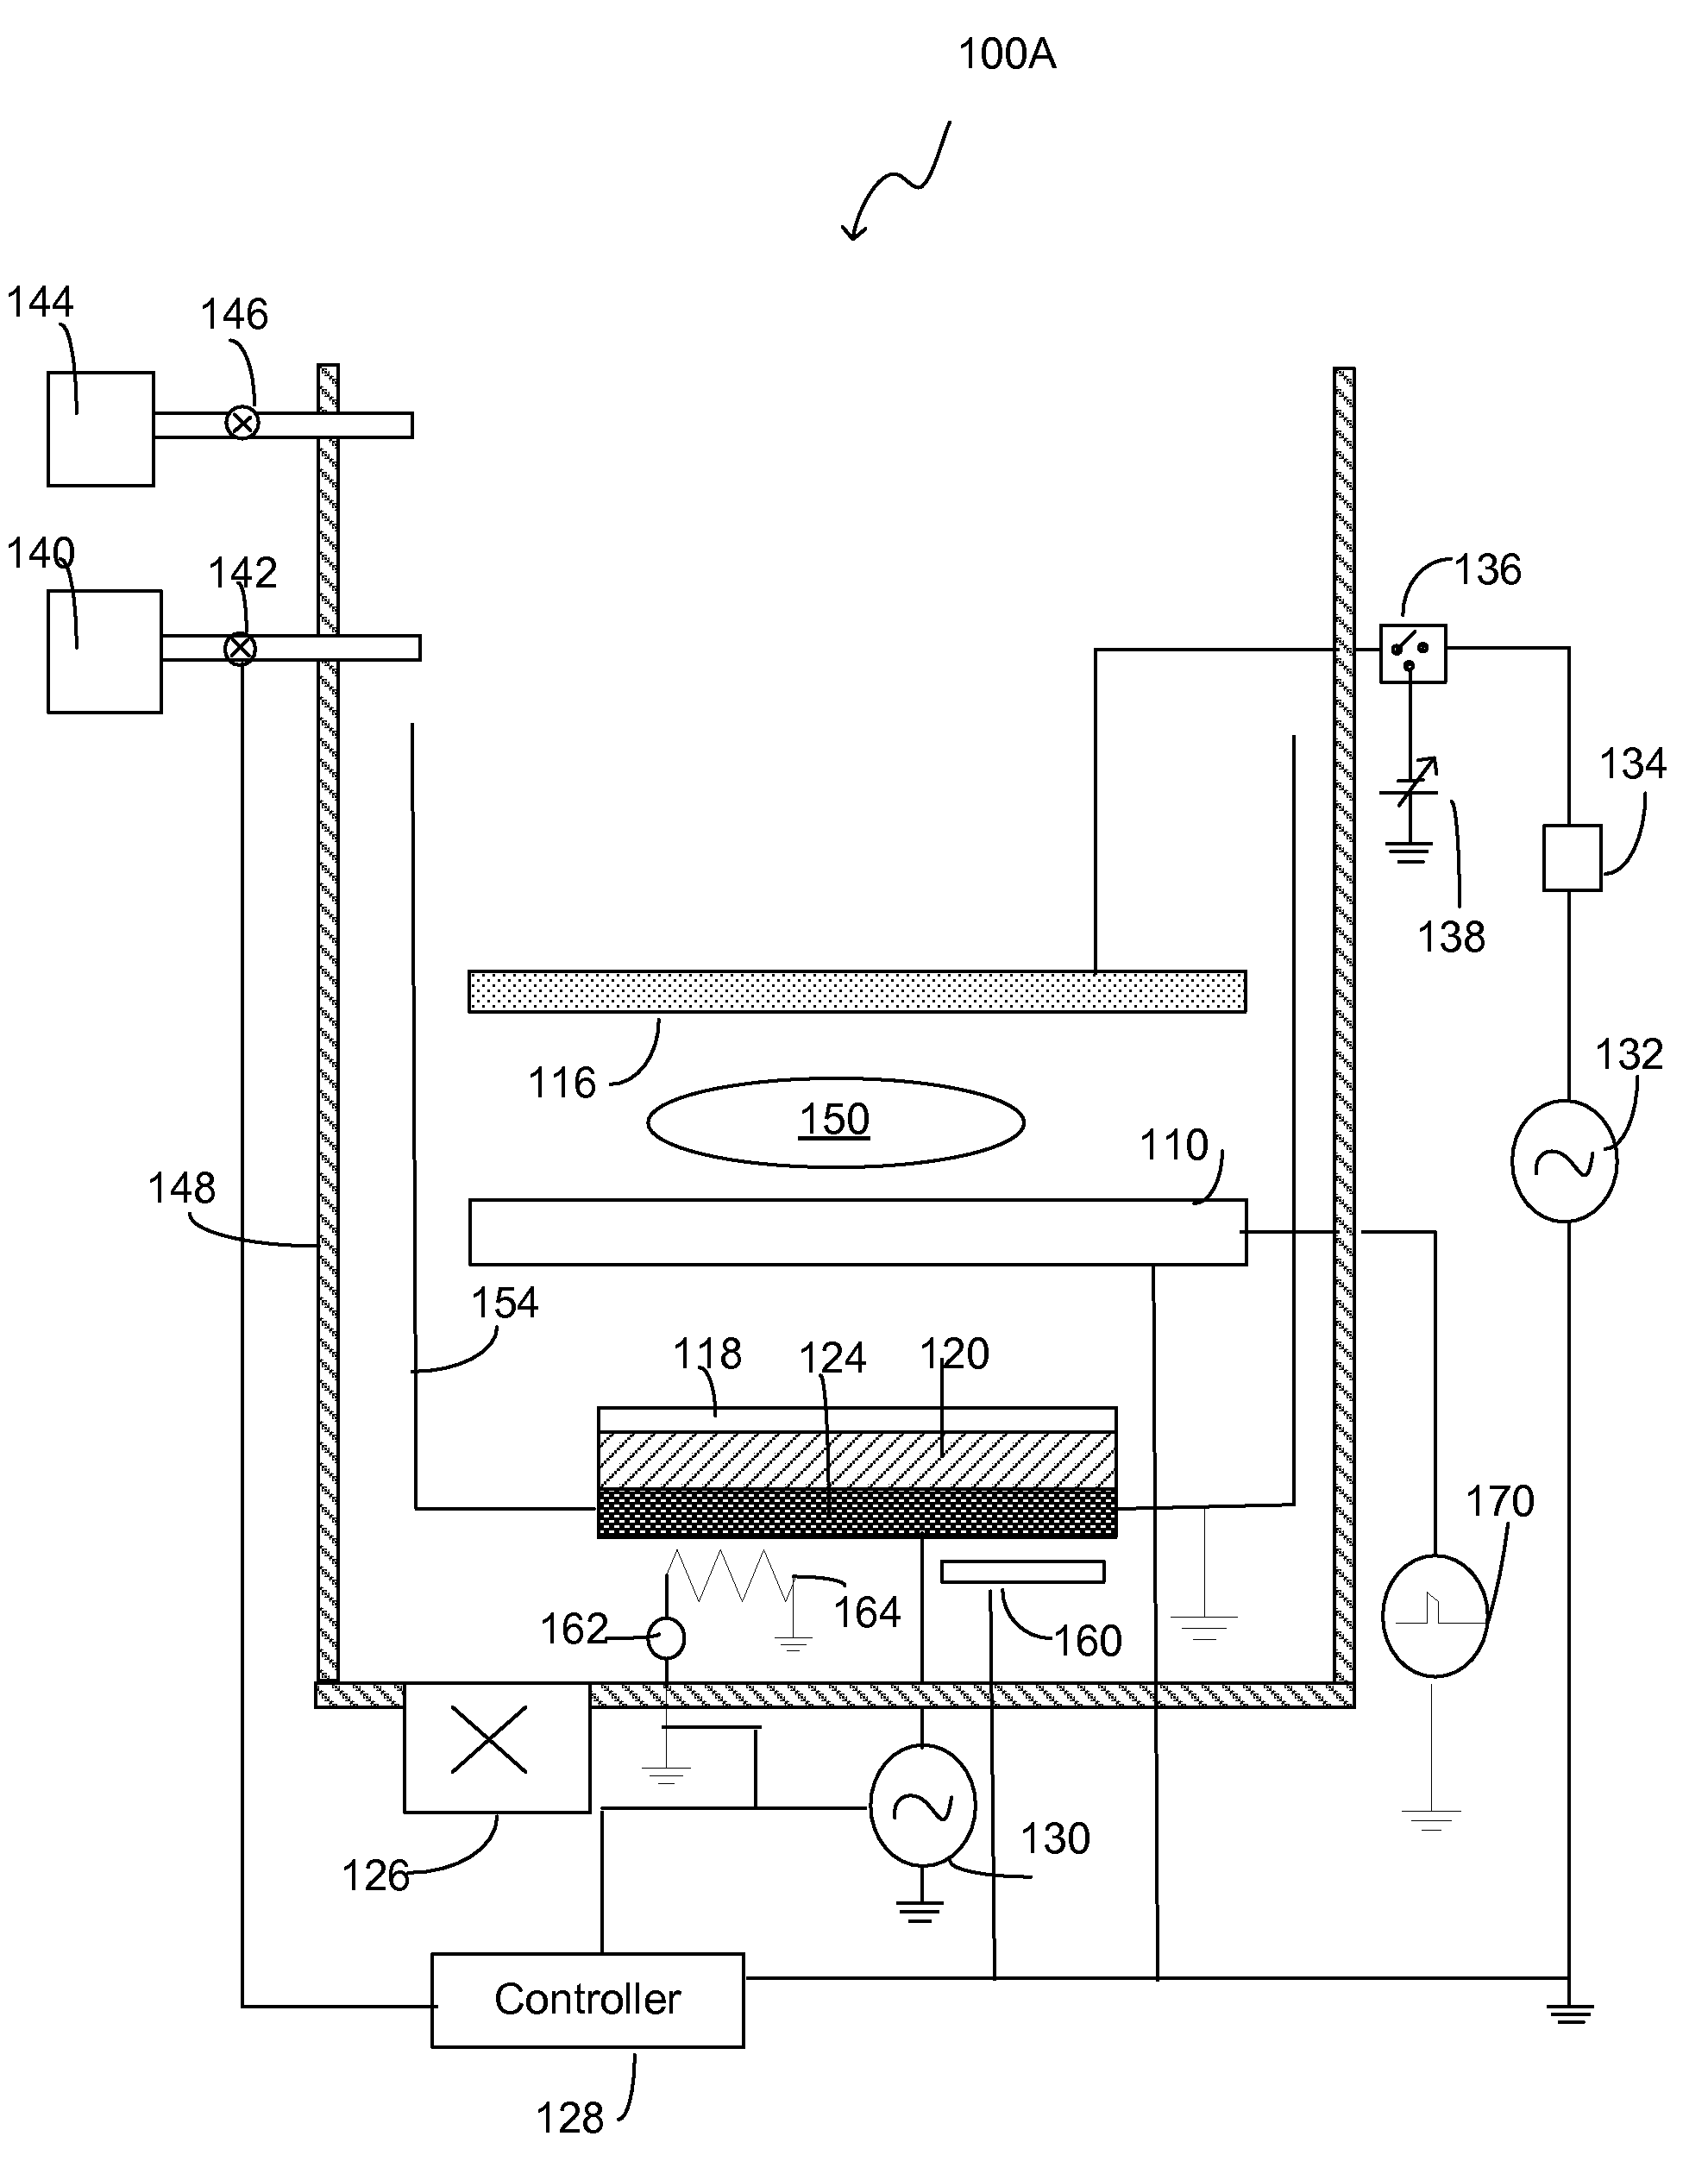 Coaxial microwave assisted deposition and etch systems